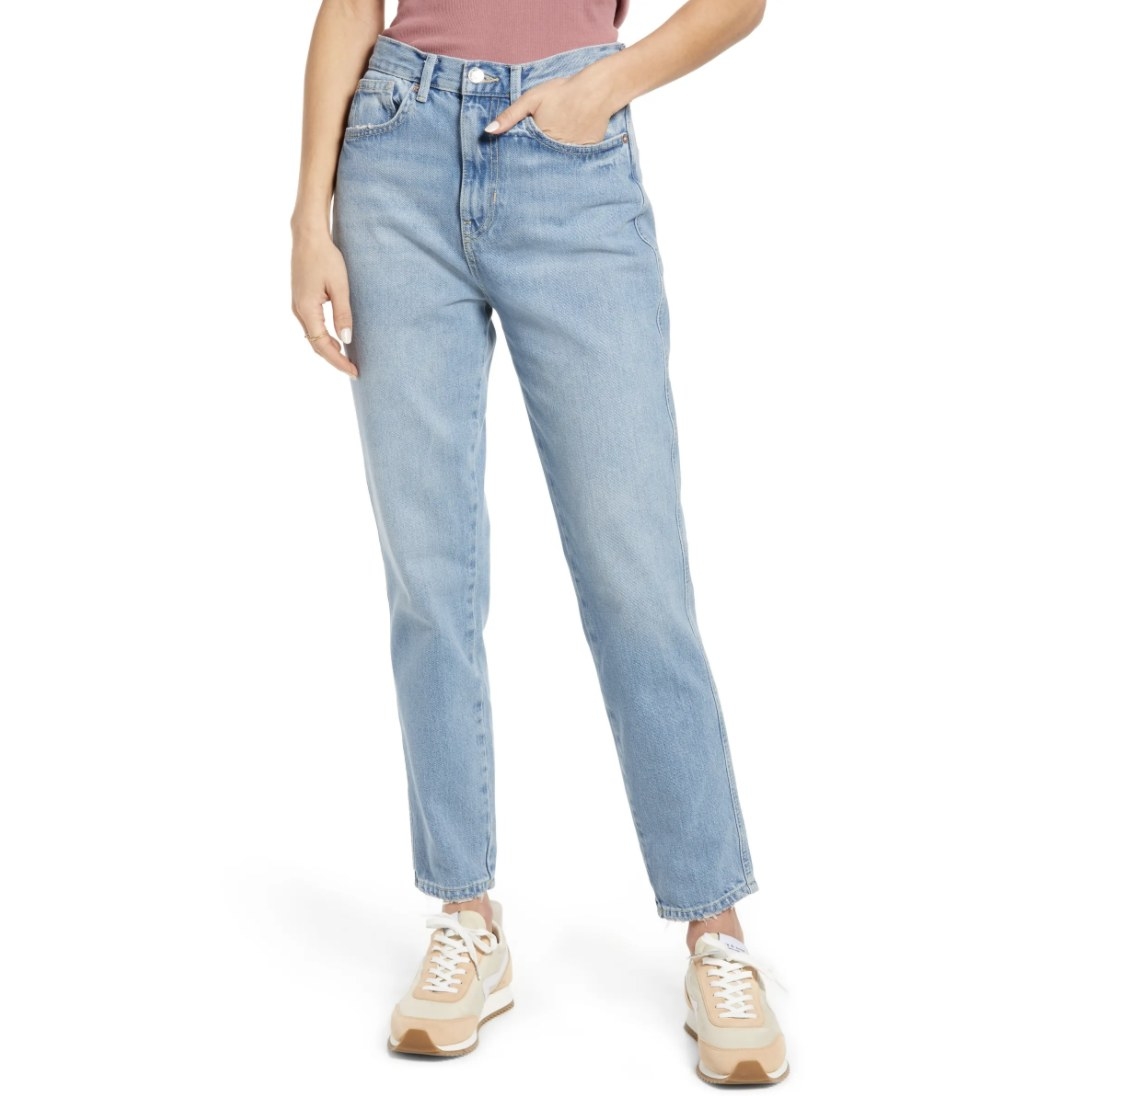 Model is wearing light denim jeans and peach tennis shoes